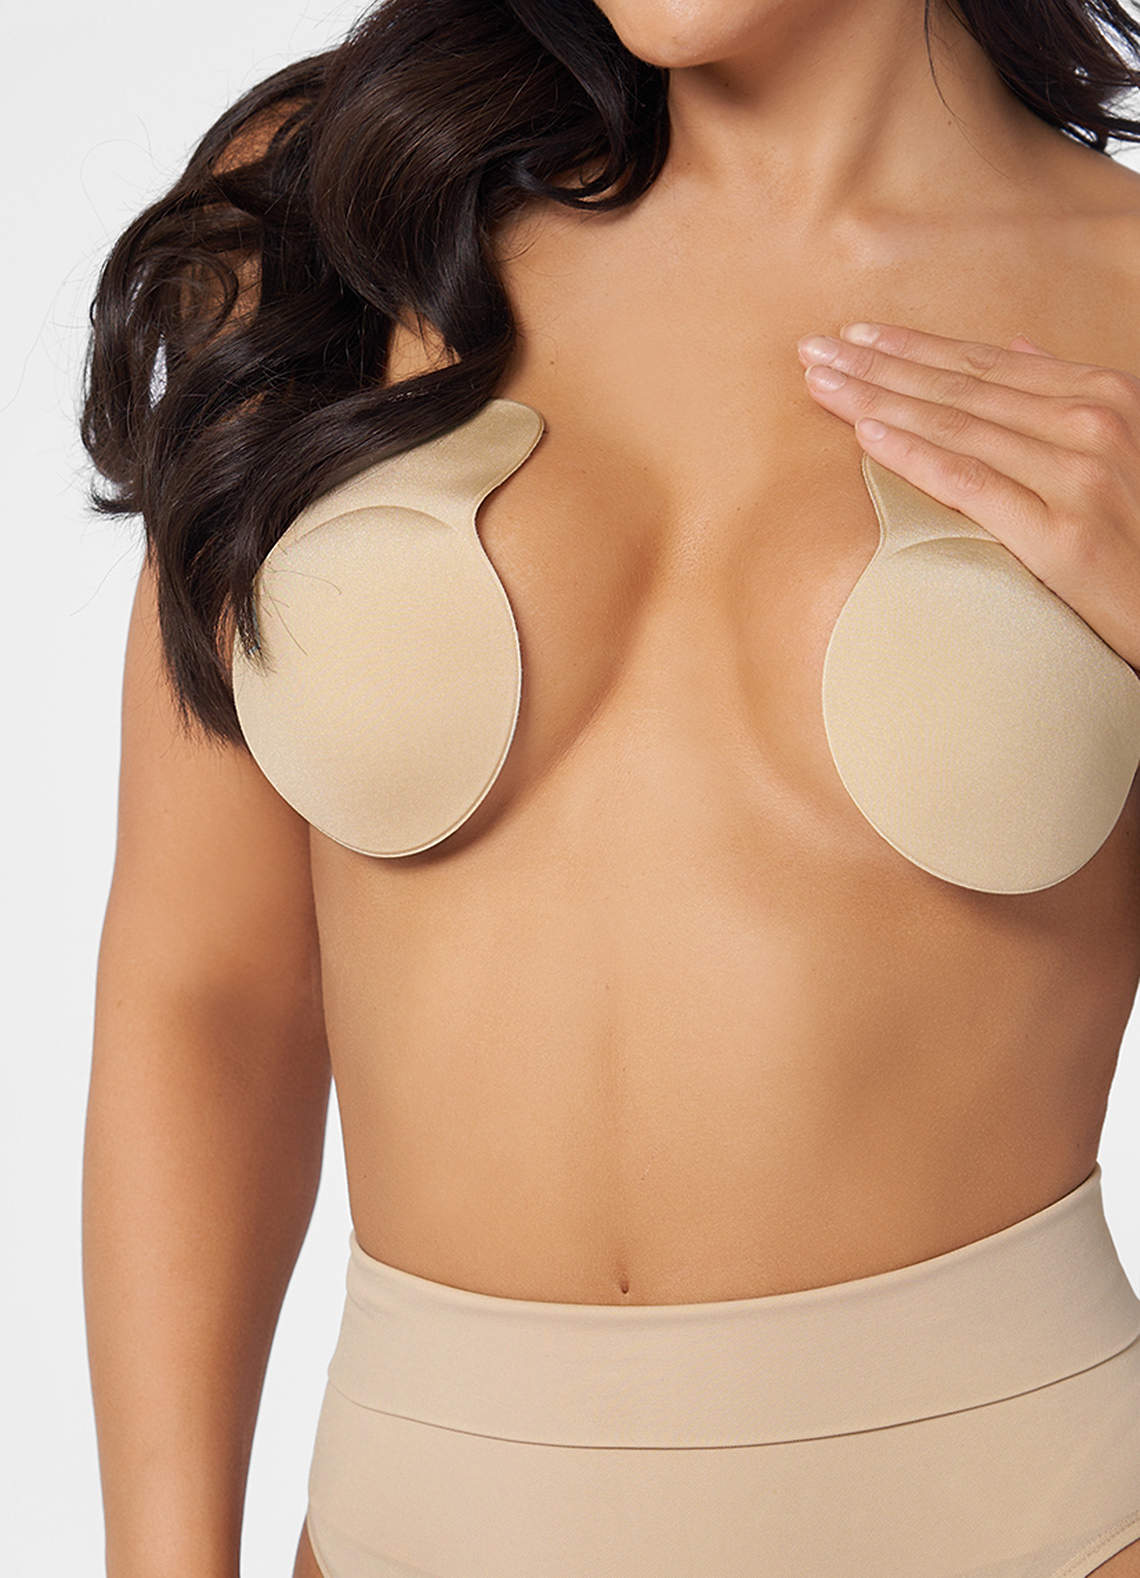 Hiramex Nippleless Covers, Silicone Breast Lift Reusable Breast